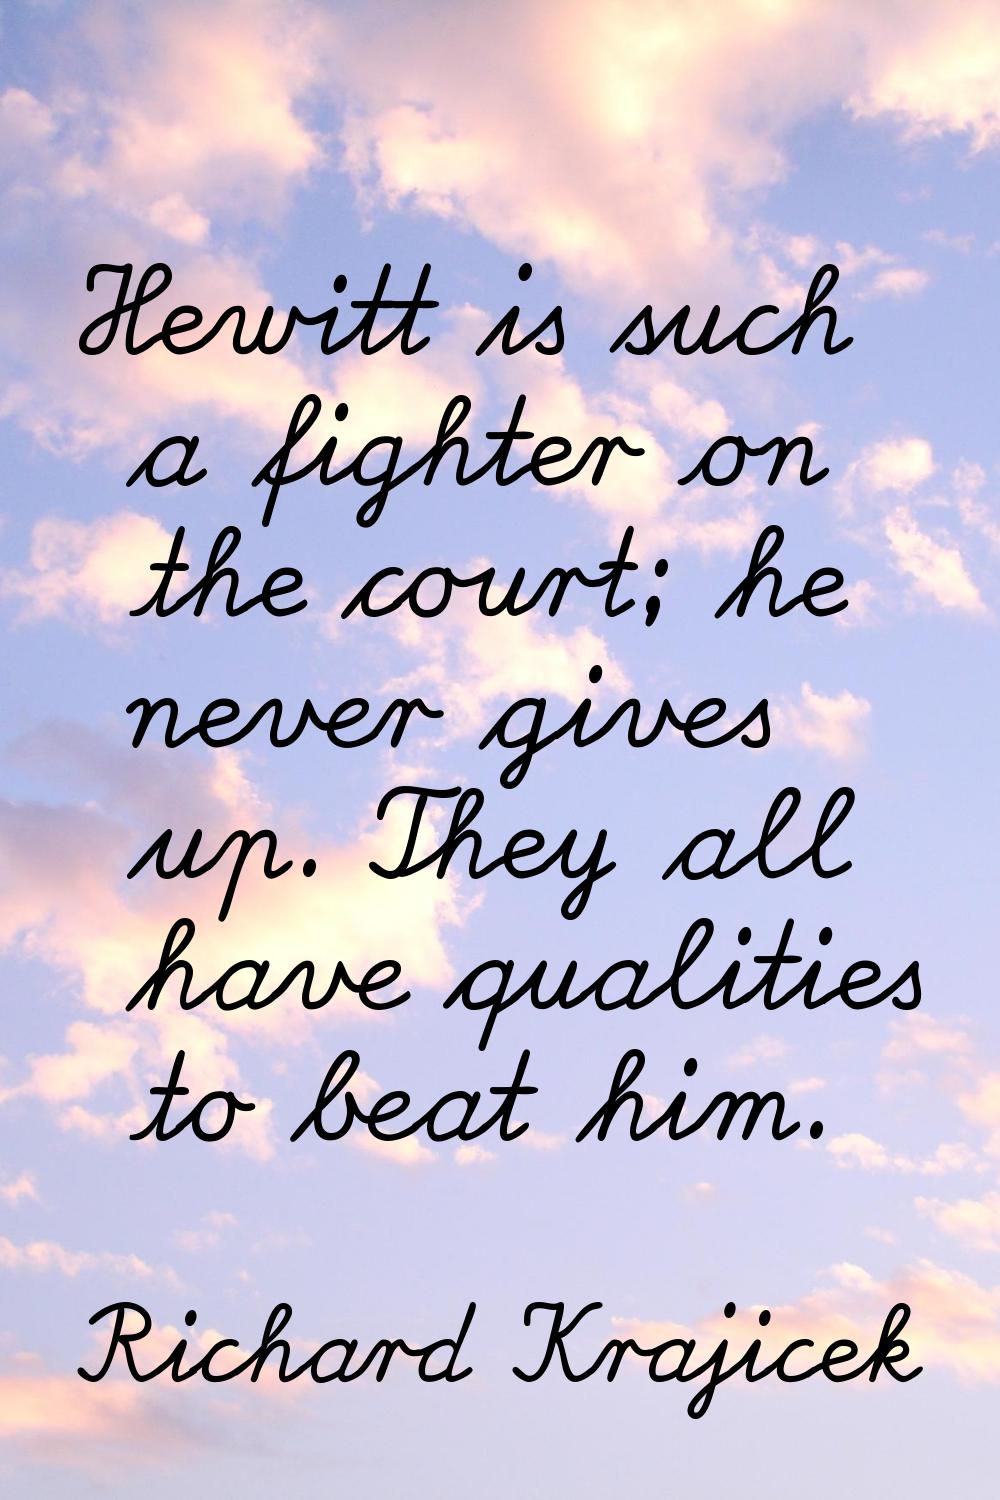 Hewitt is such a fighter on the court; he never gives up. They all have qualities to beat him.